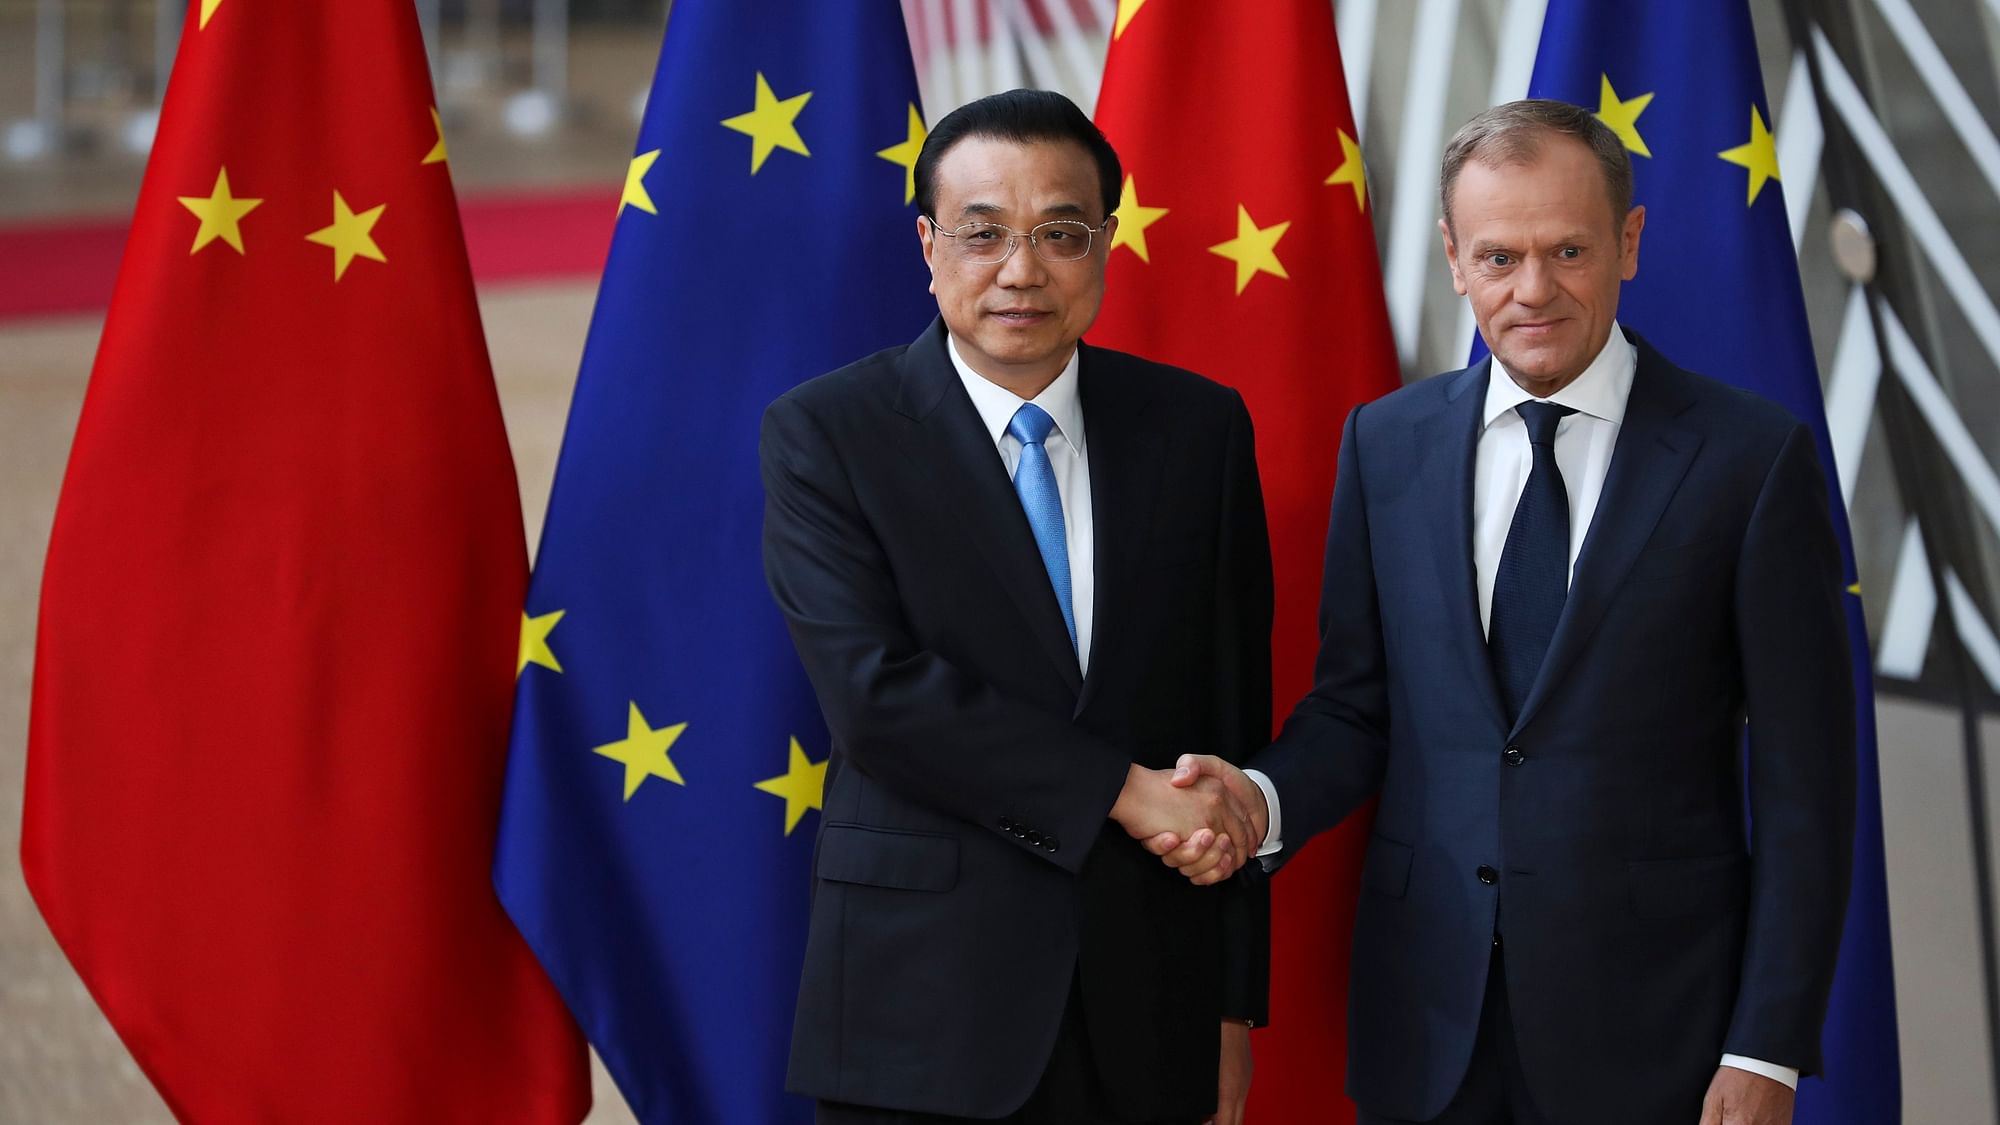 Chinese Premier Li Keqiang with European Council President Donald Tusk.